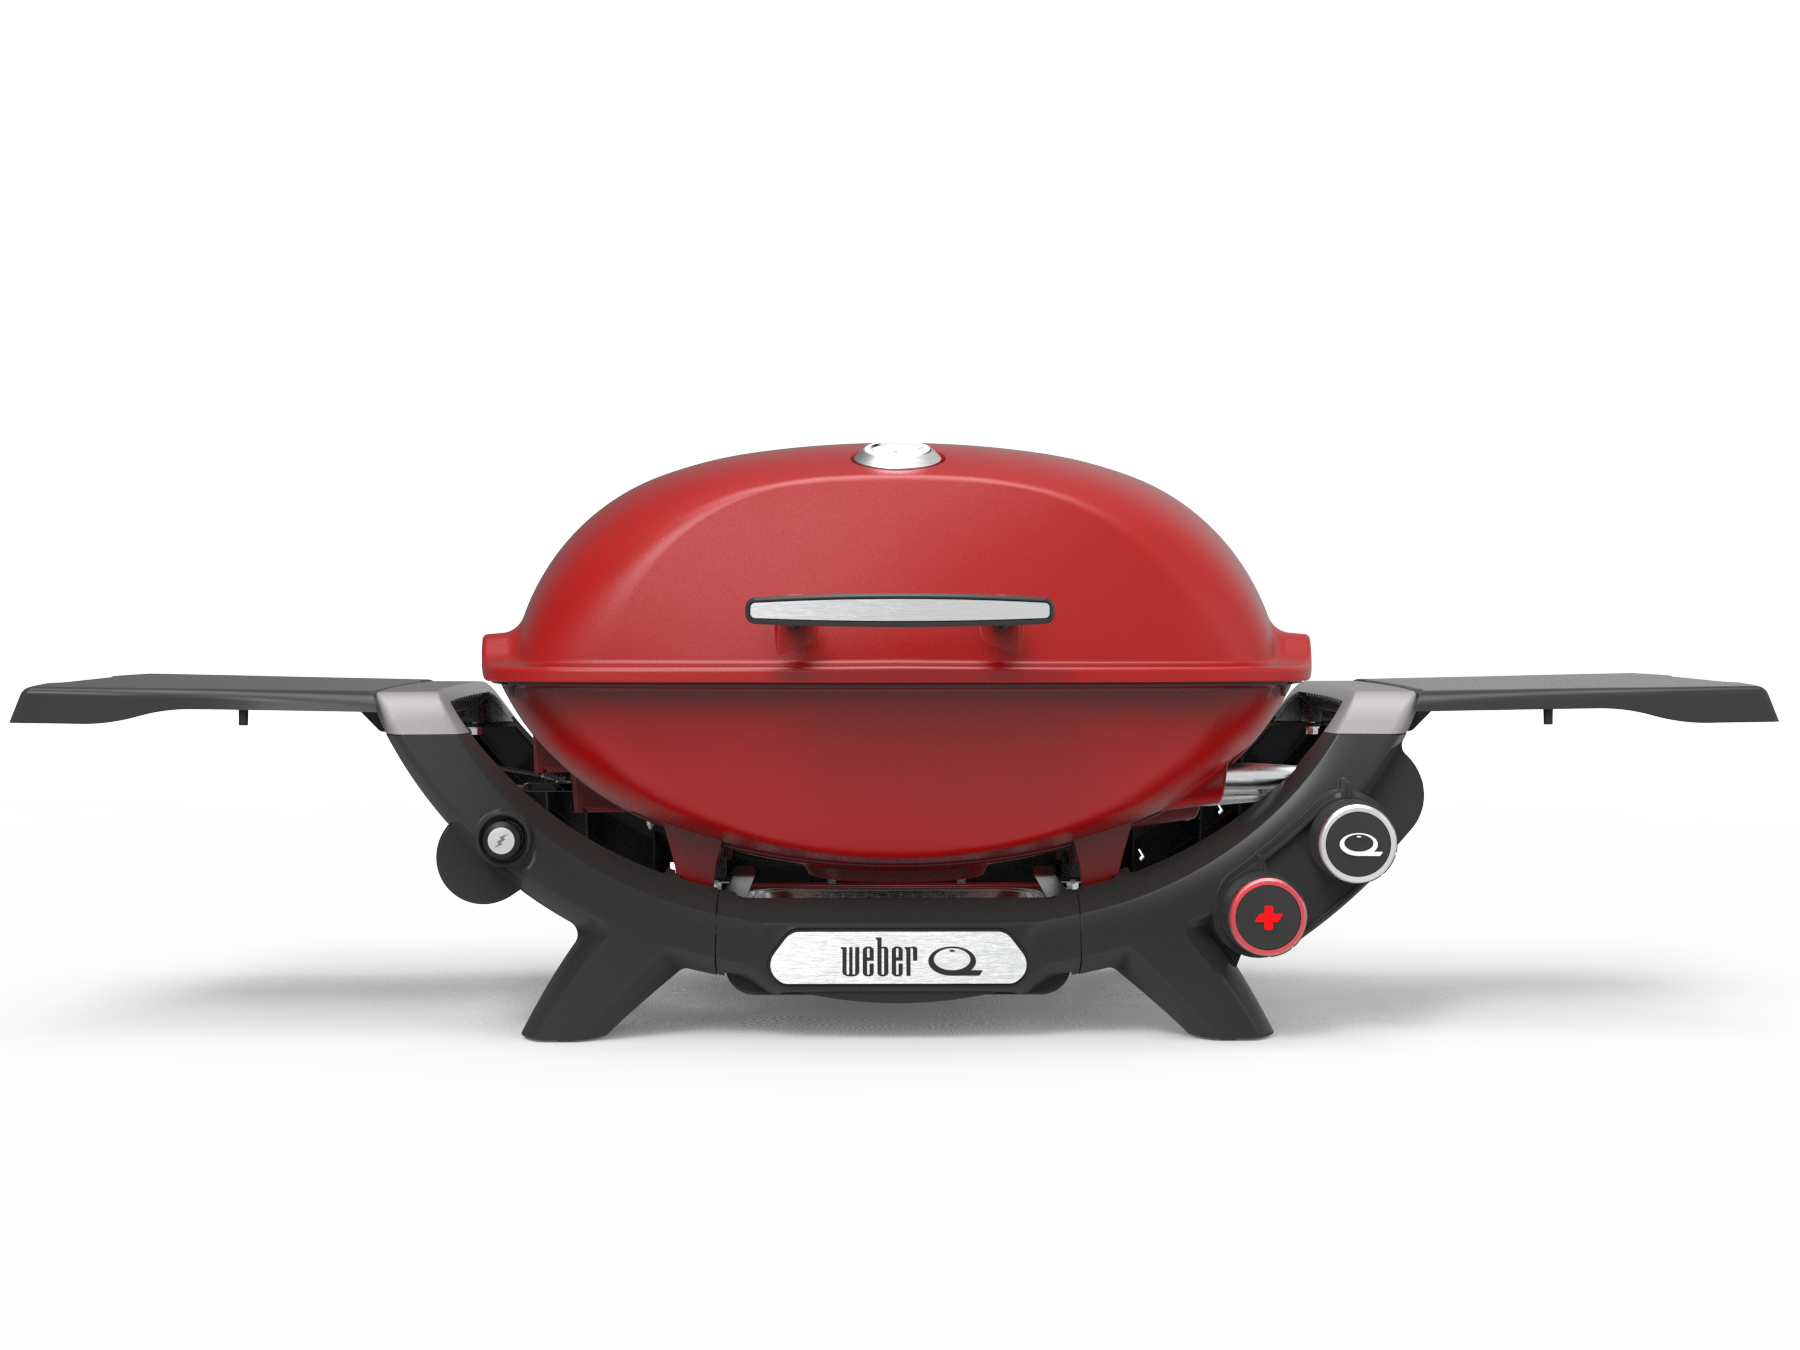 Weber Q 2800 plus front view in flame red colour